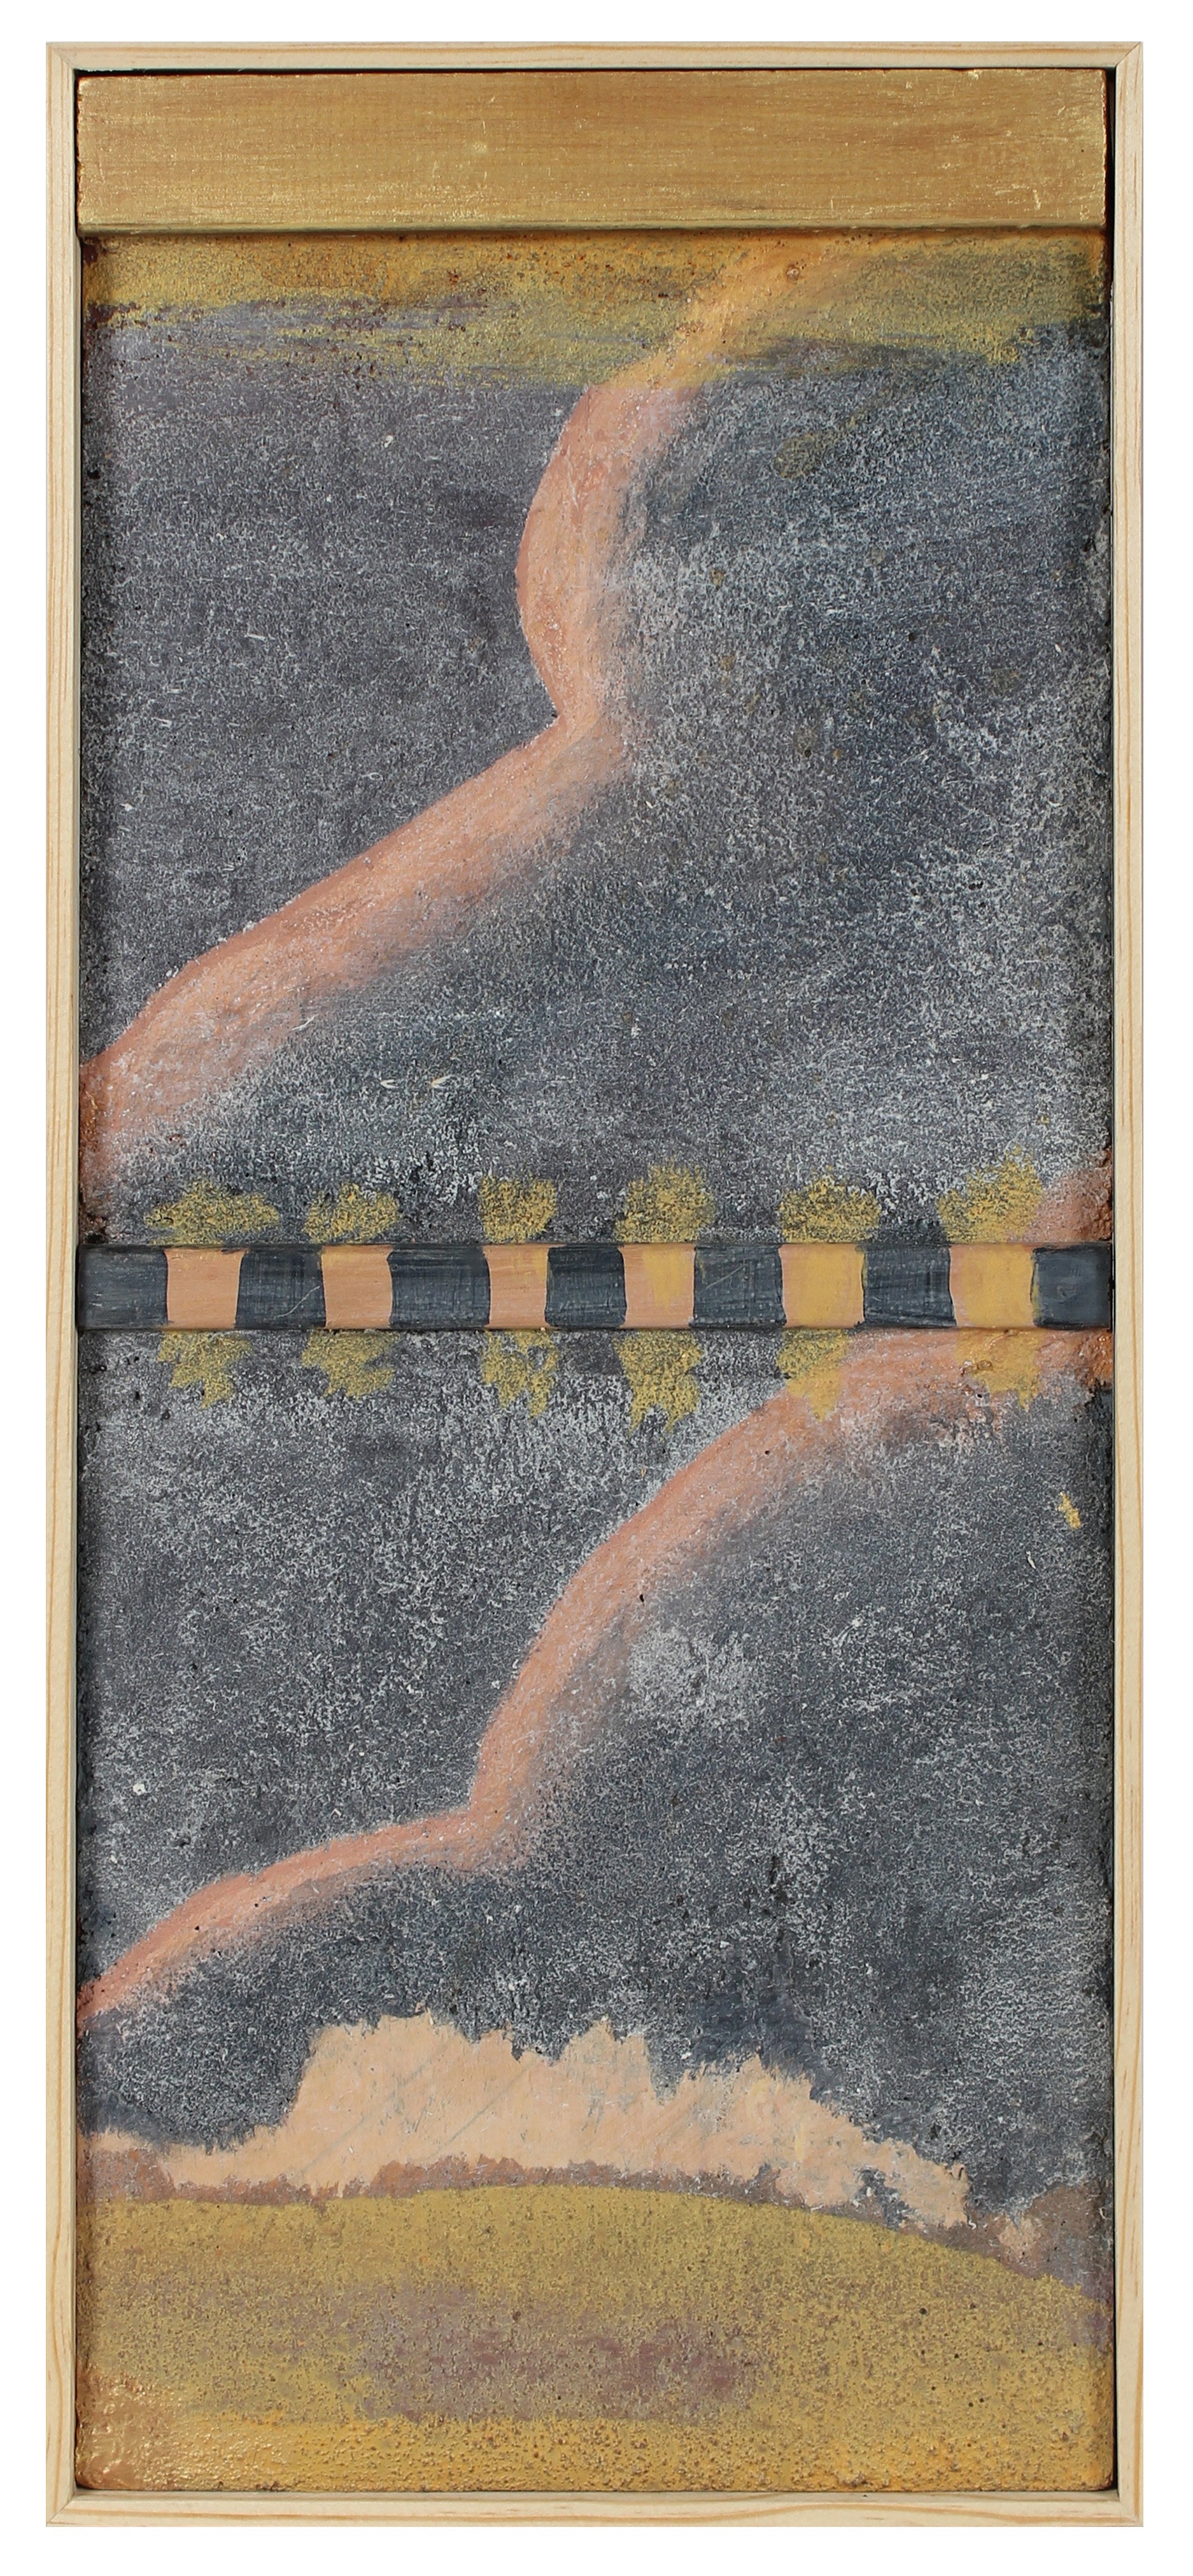 Layered Abstract Mixed Media<br>Sand, Cement & Paint on Wood<br><br>#96150